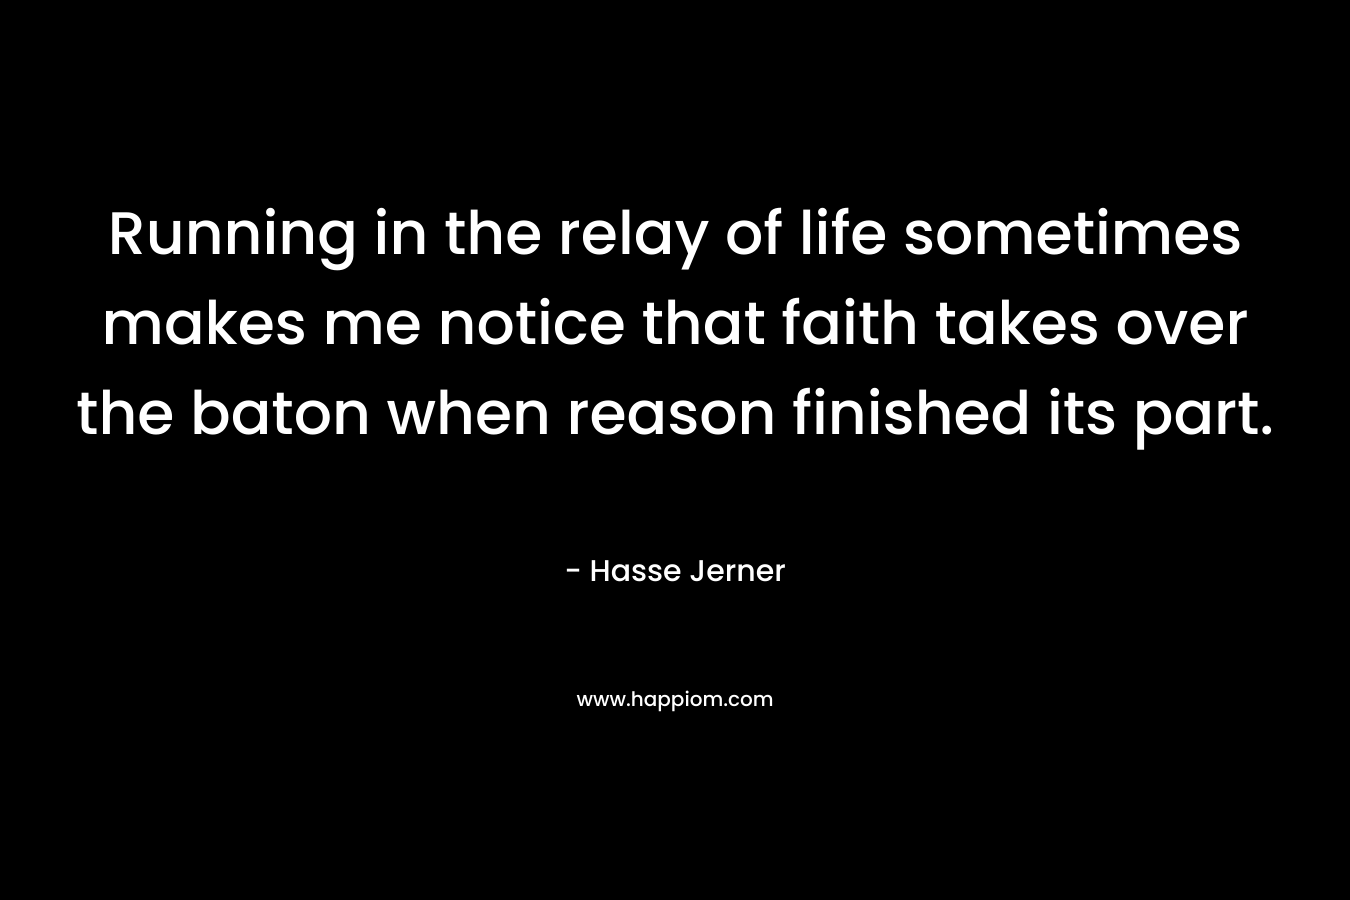 Running in the relay of life sometimes makes me notice that faith takes over the baton when reason finished its part. – Hasse Jerner